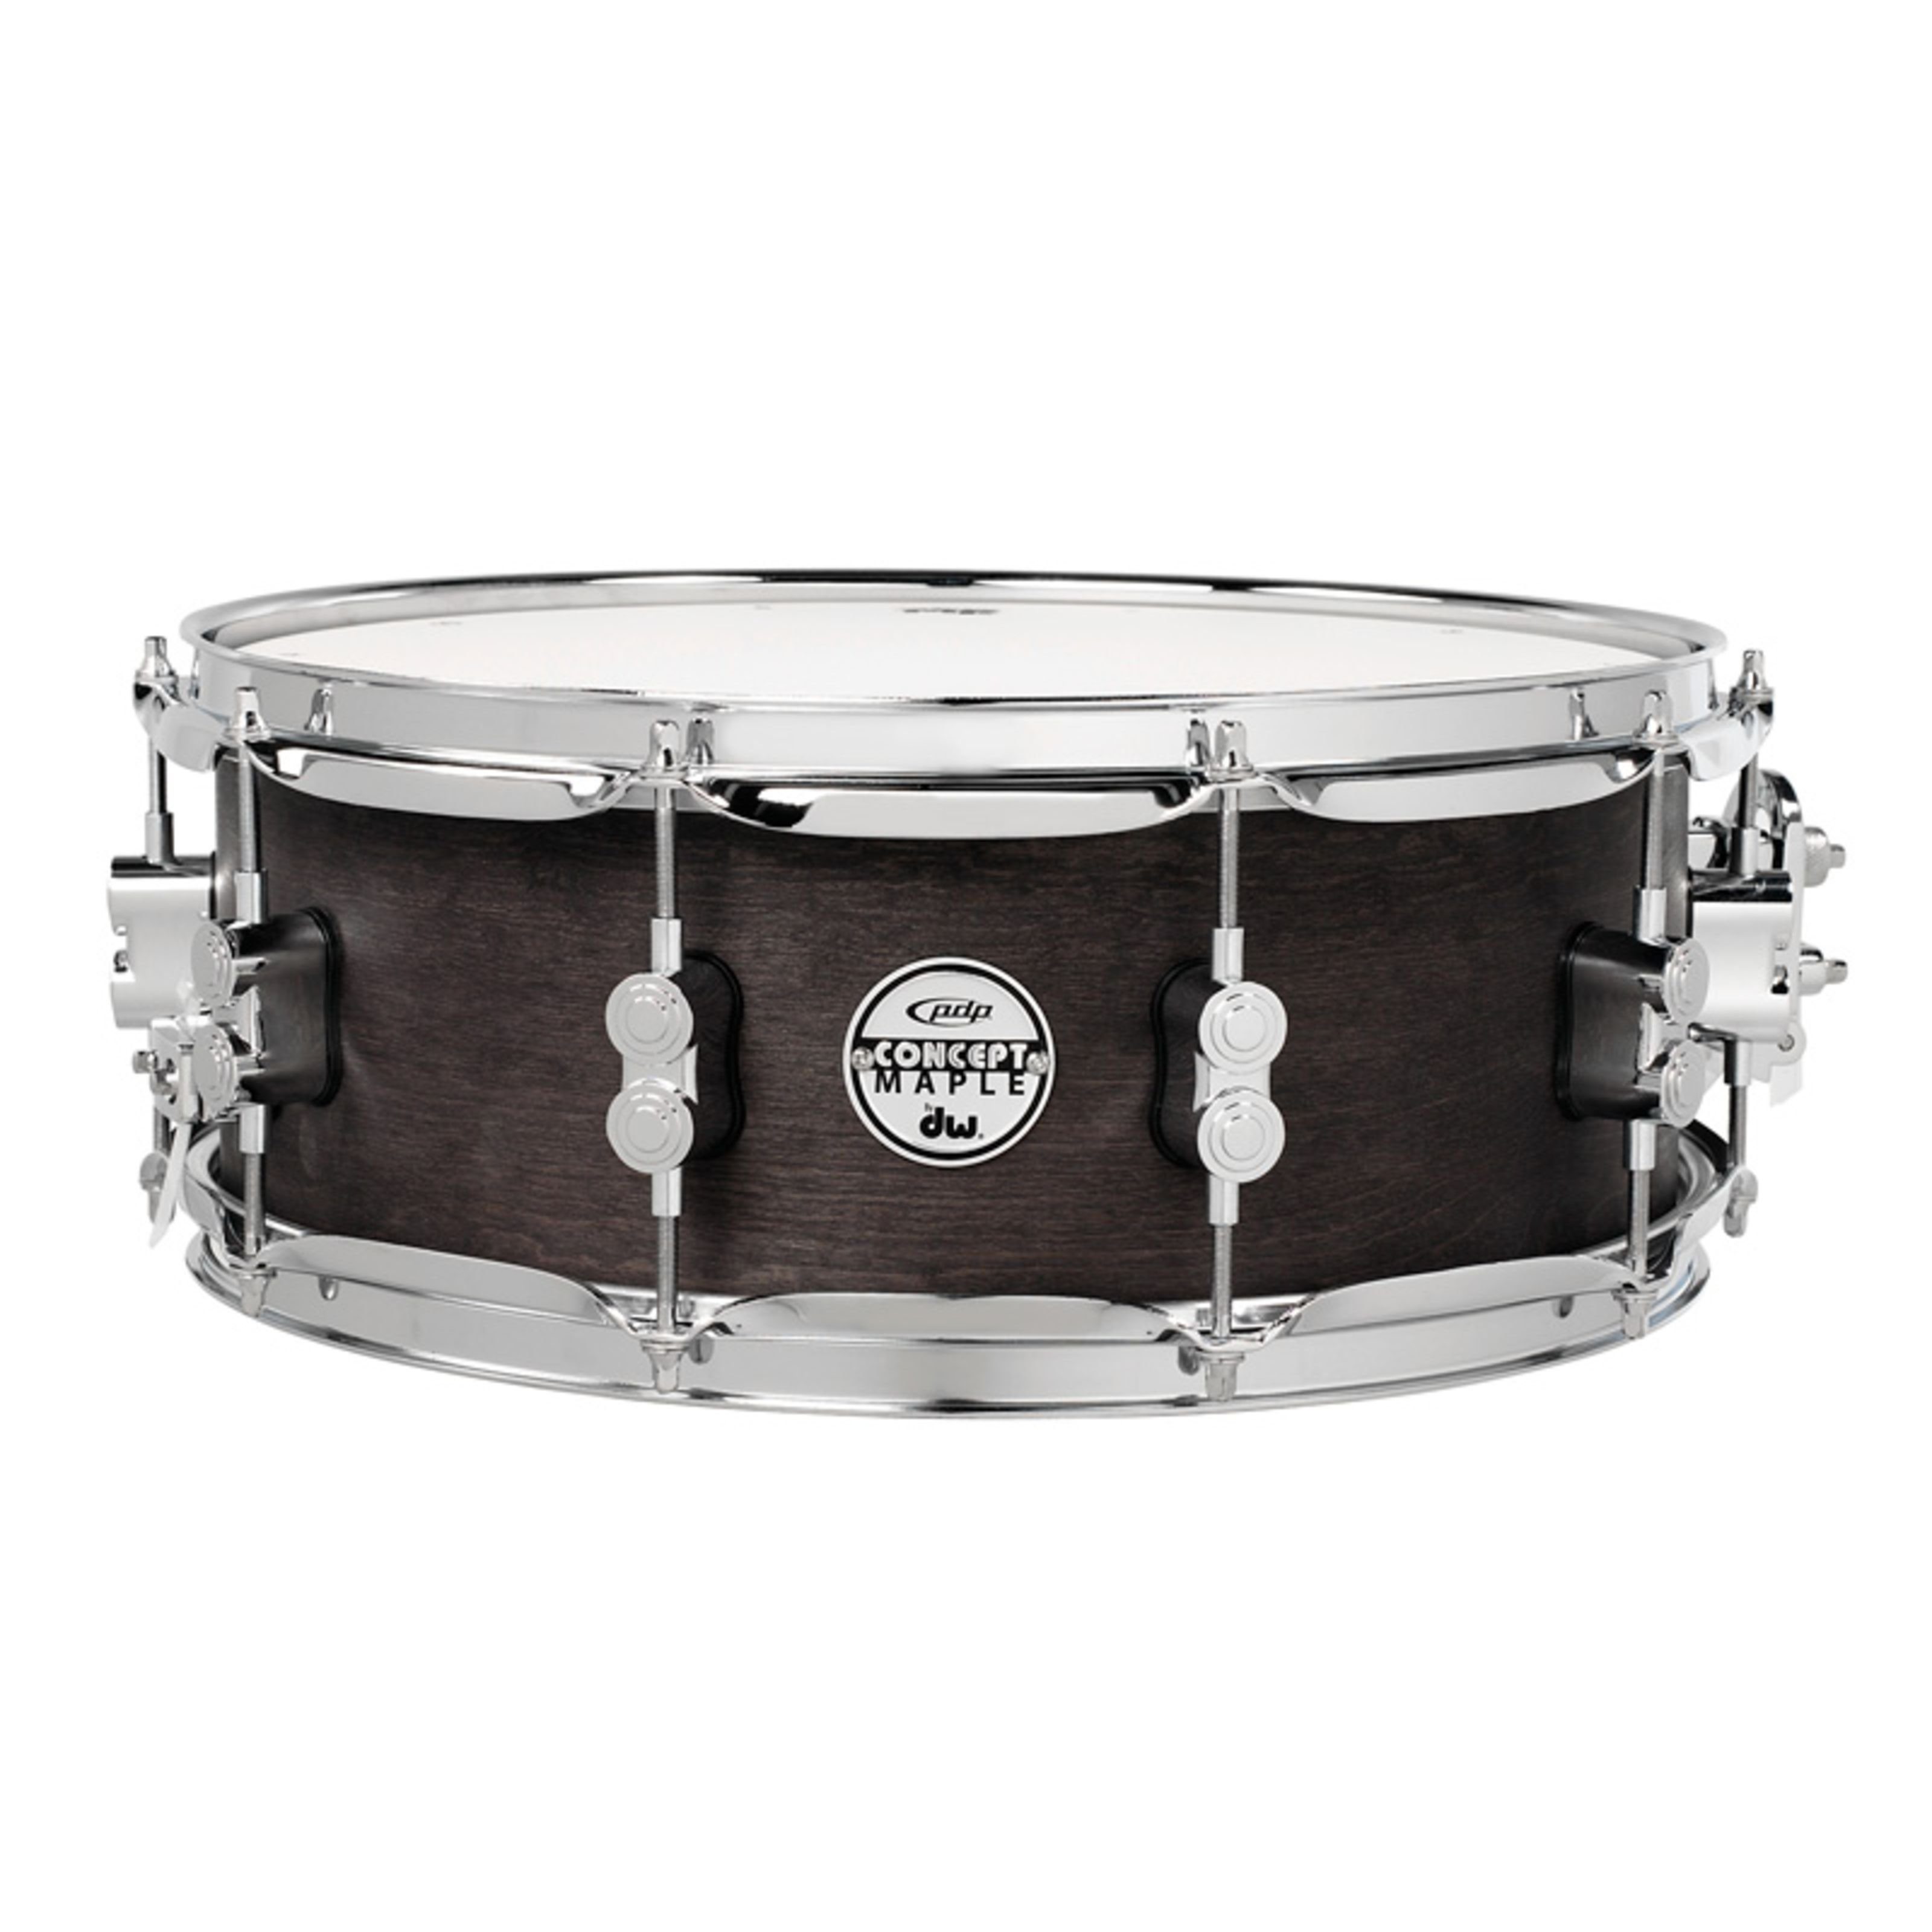 pdp Snare Drum,Black Wax Snare 14"x6,5", Schlagzeuge, Snare Drums, Black Wax Snare 14"x6,5" - Snare Drum